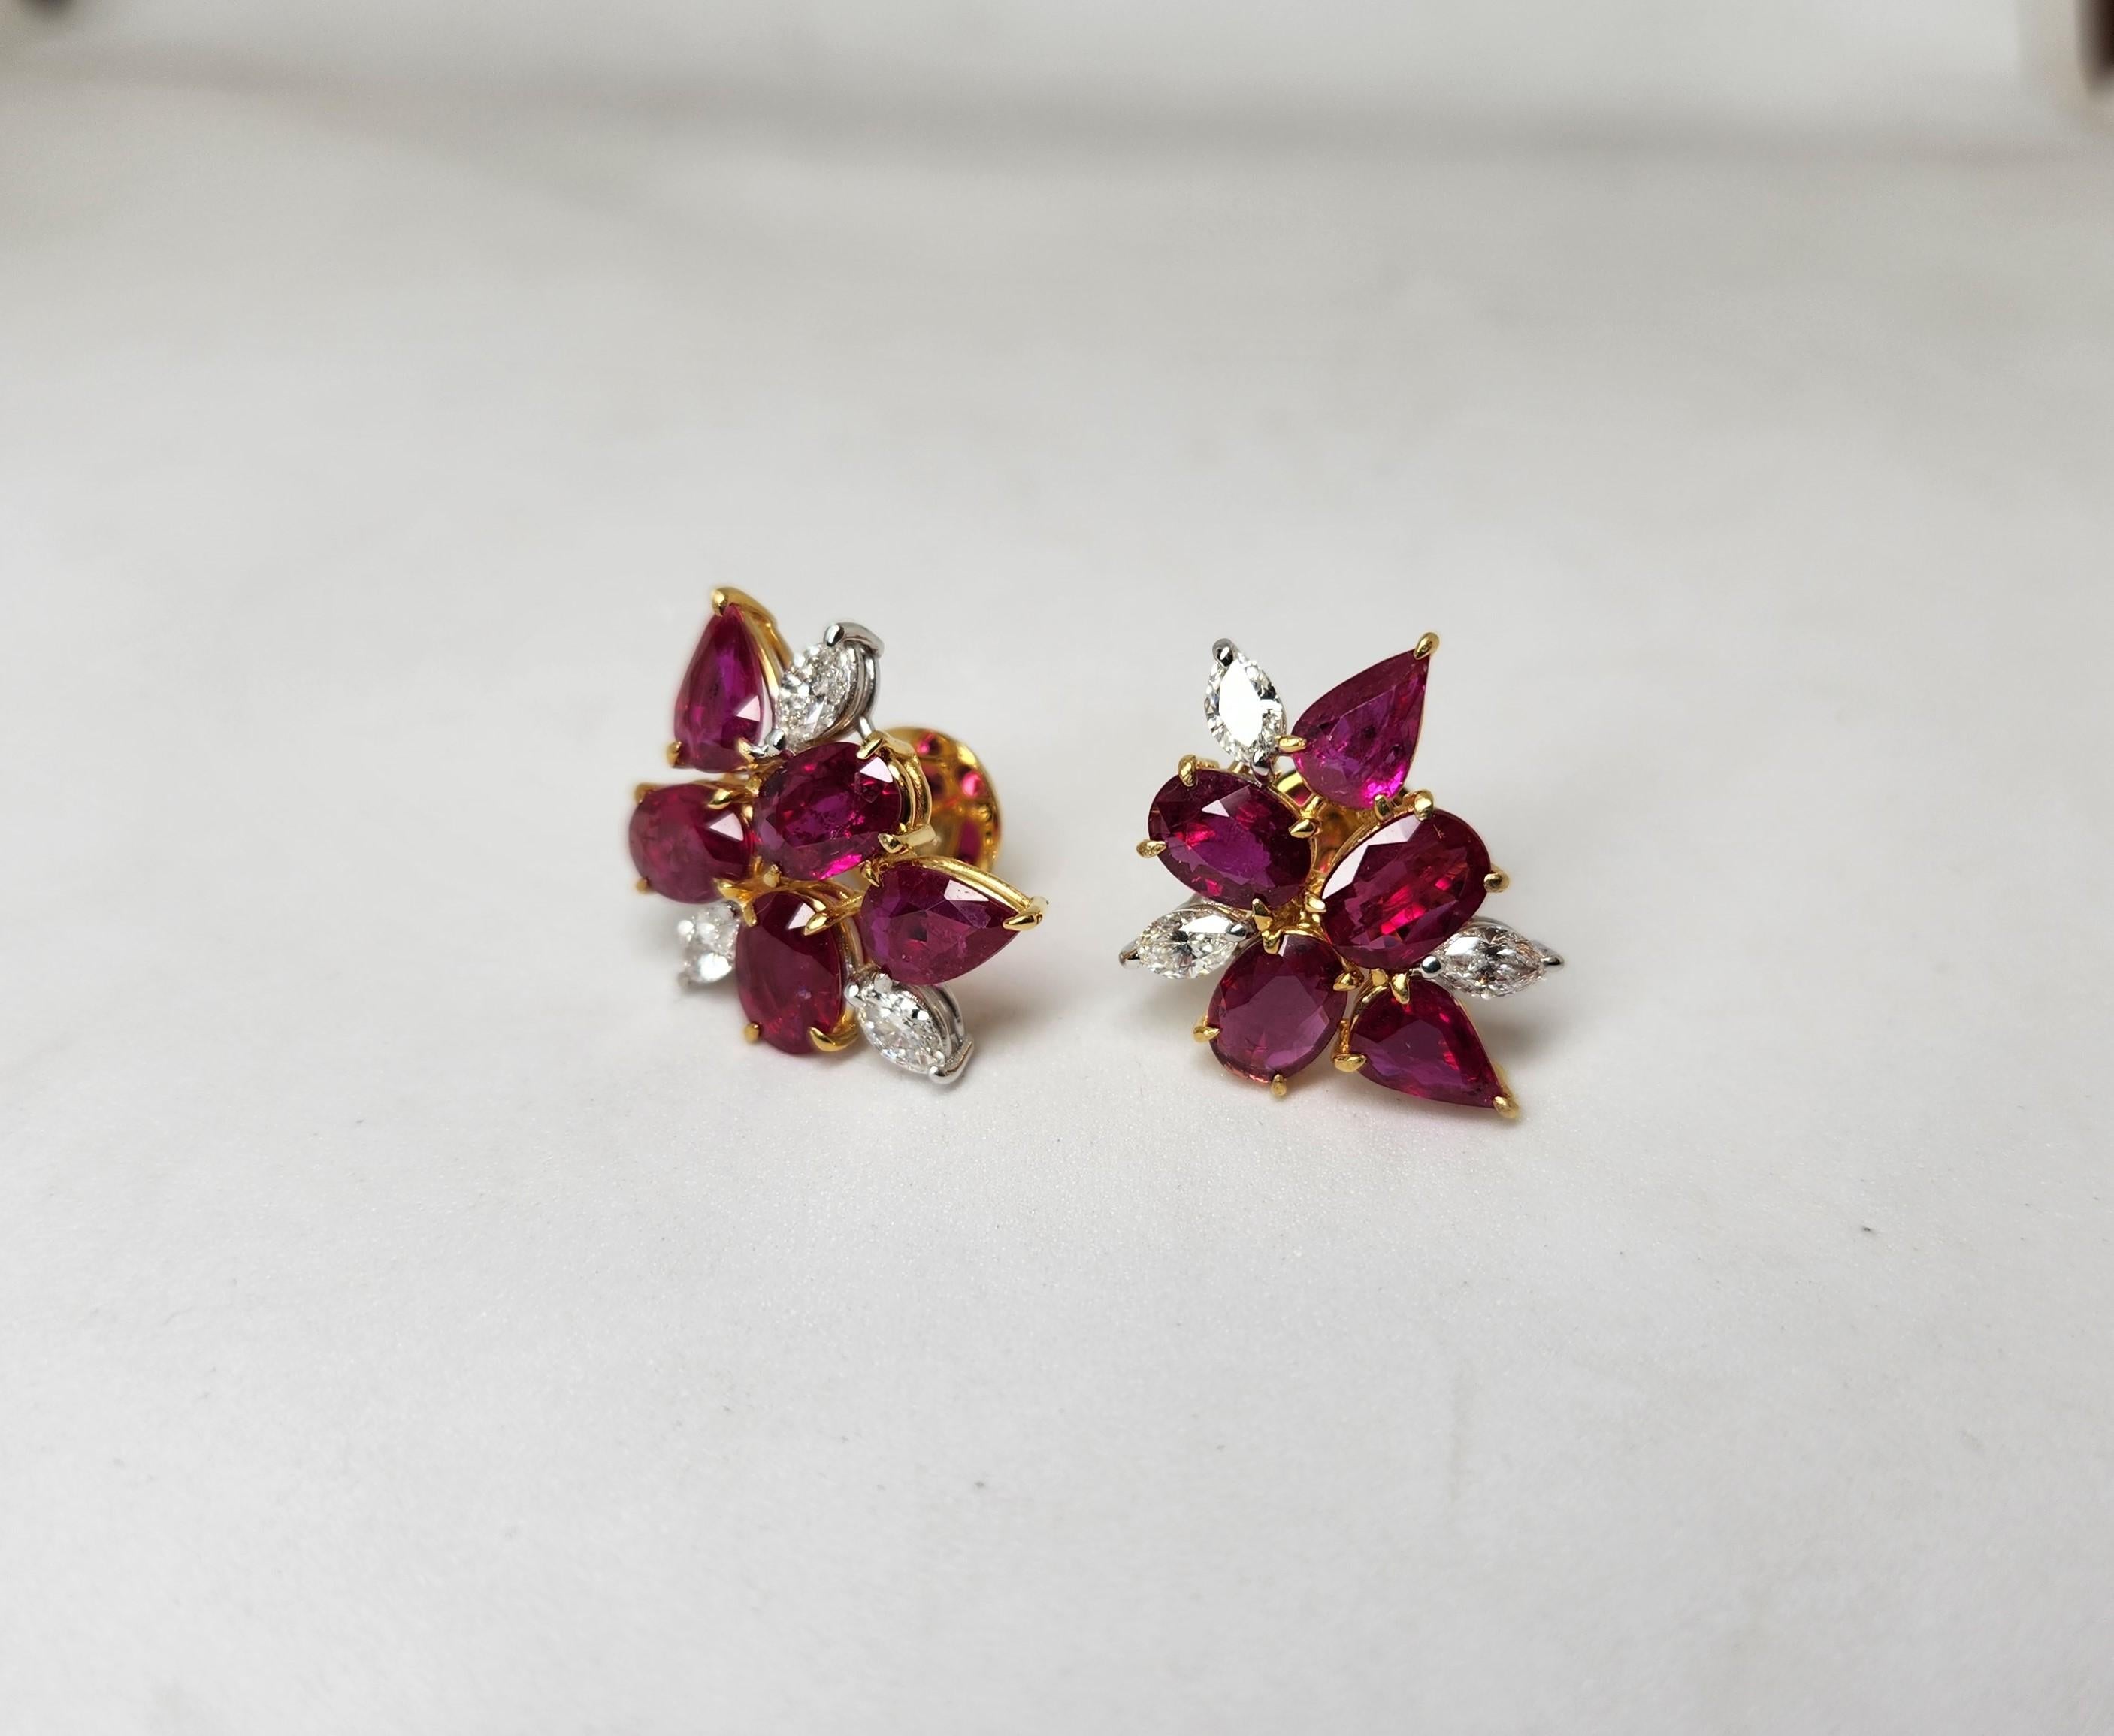 10 Mozambique rubies set with diamonds delicately  crafted in yellow gold.
10 Rubies 7.32 carats
6 Diamond marquise 0.91 carats
18 karat gold 6.22 grams